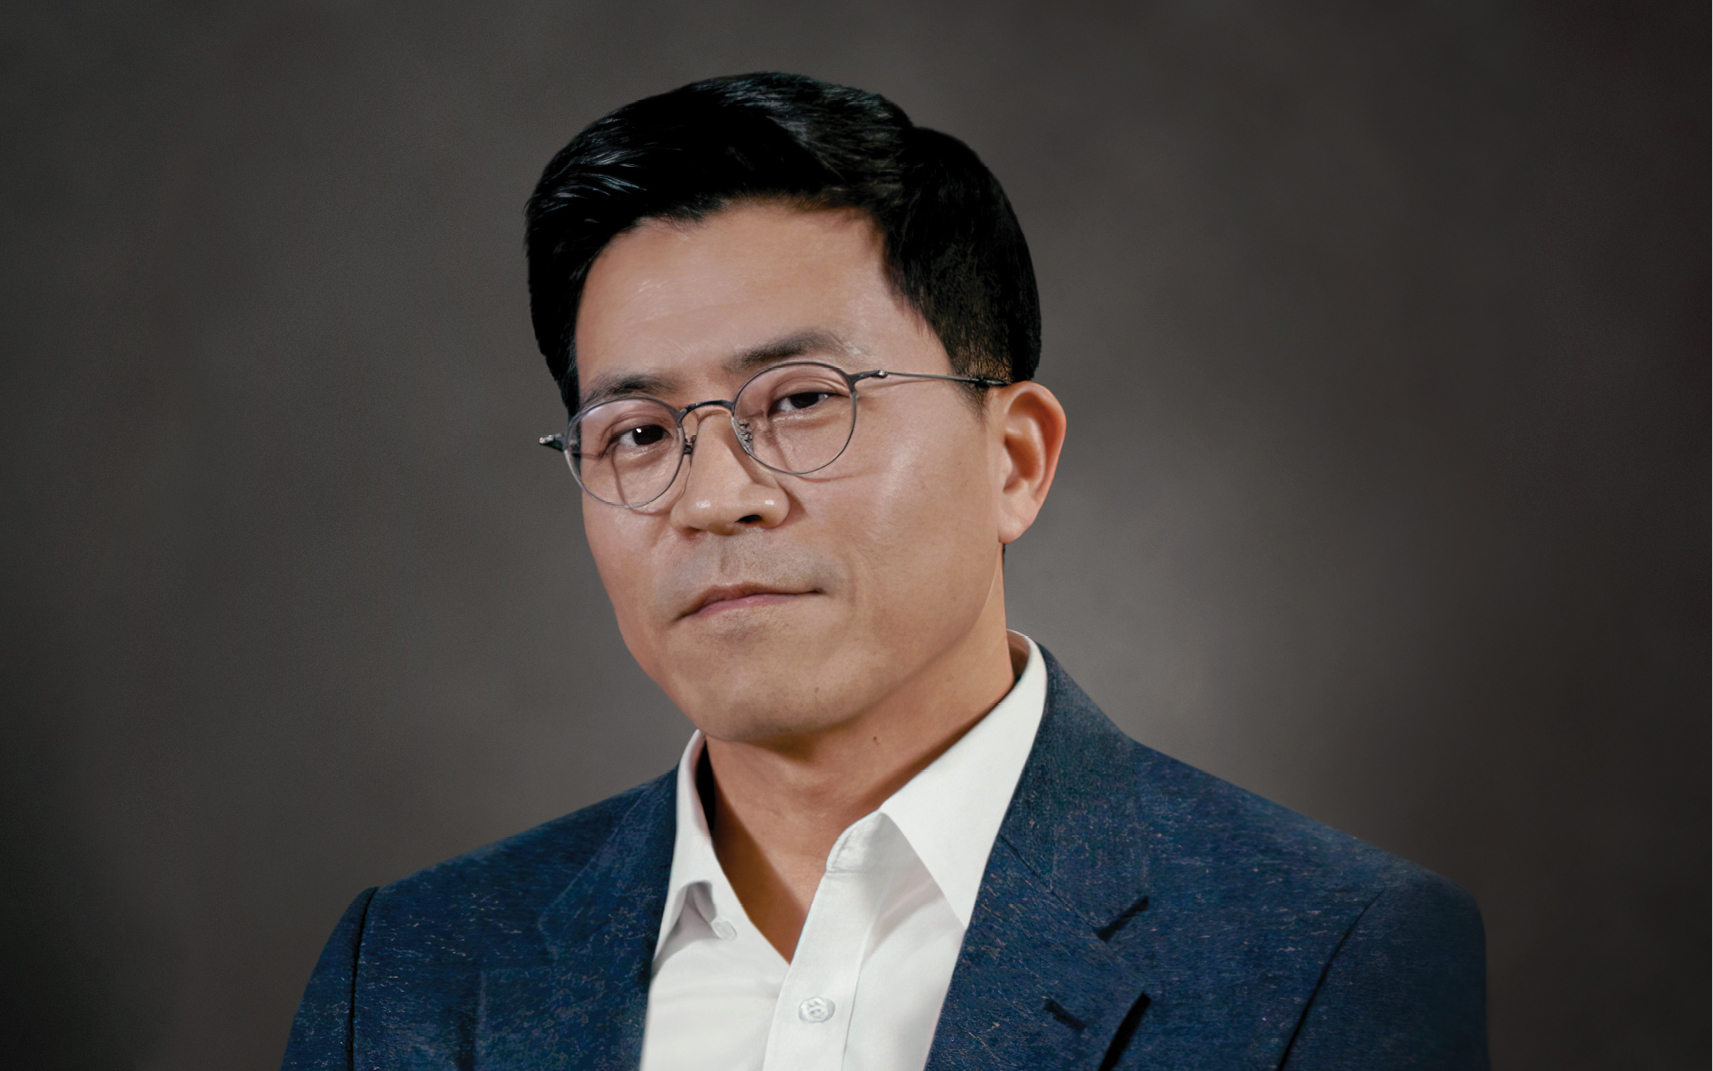 A picture of DEVELON CEO Chris Jeong.